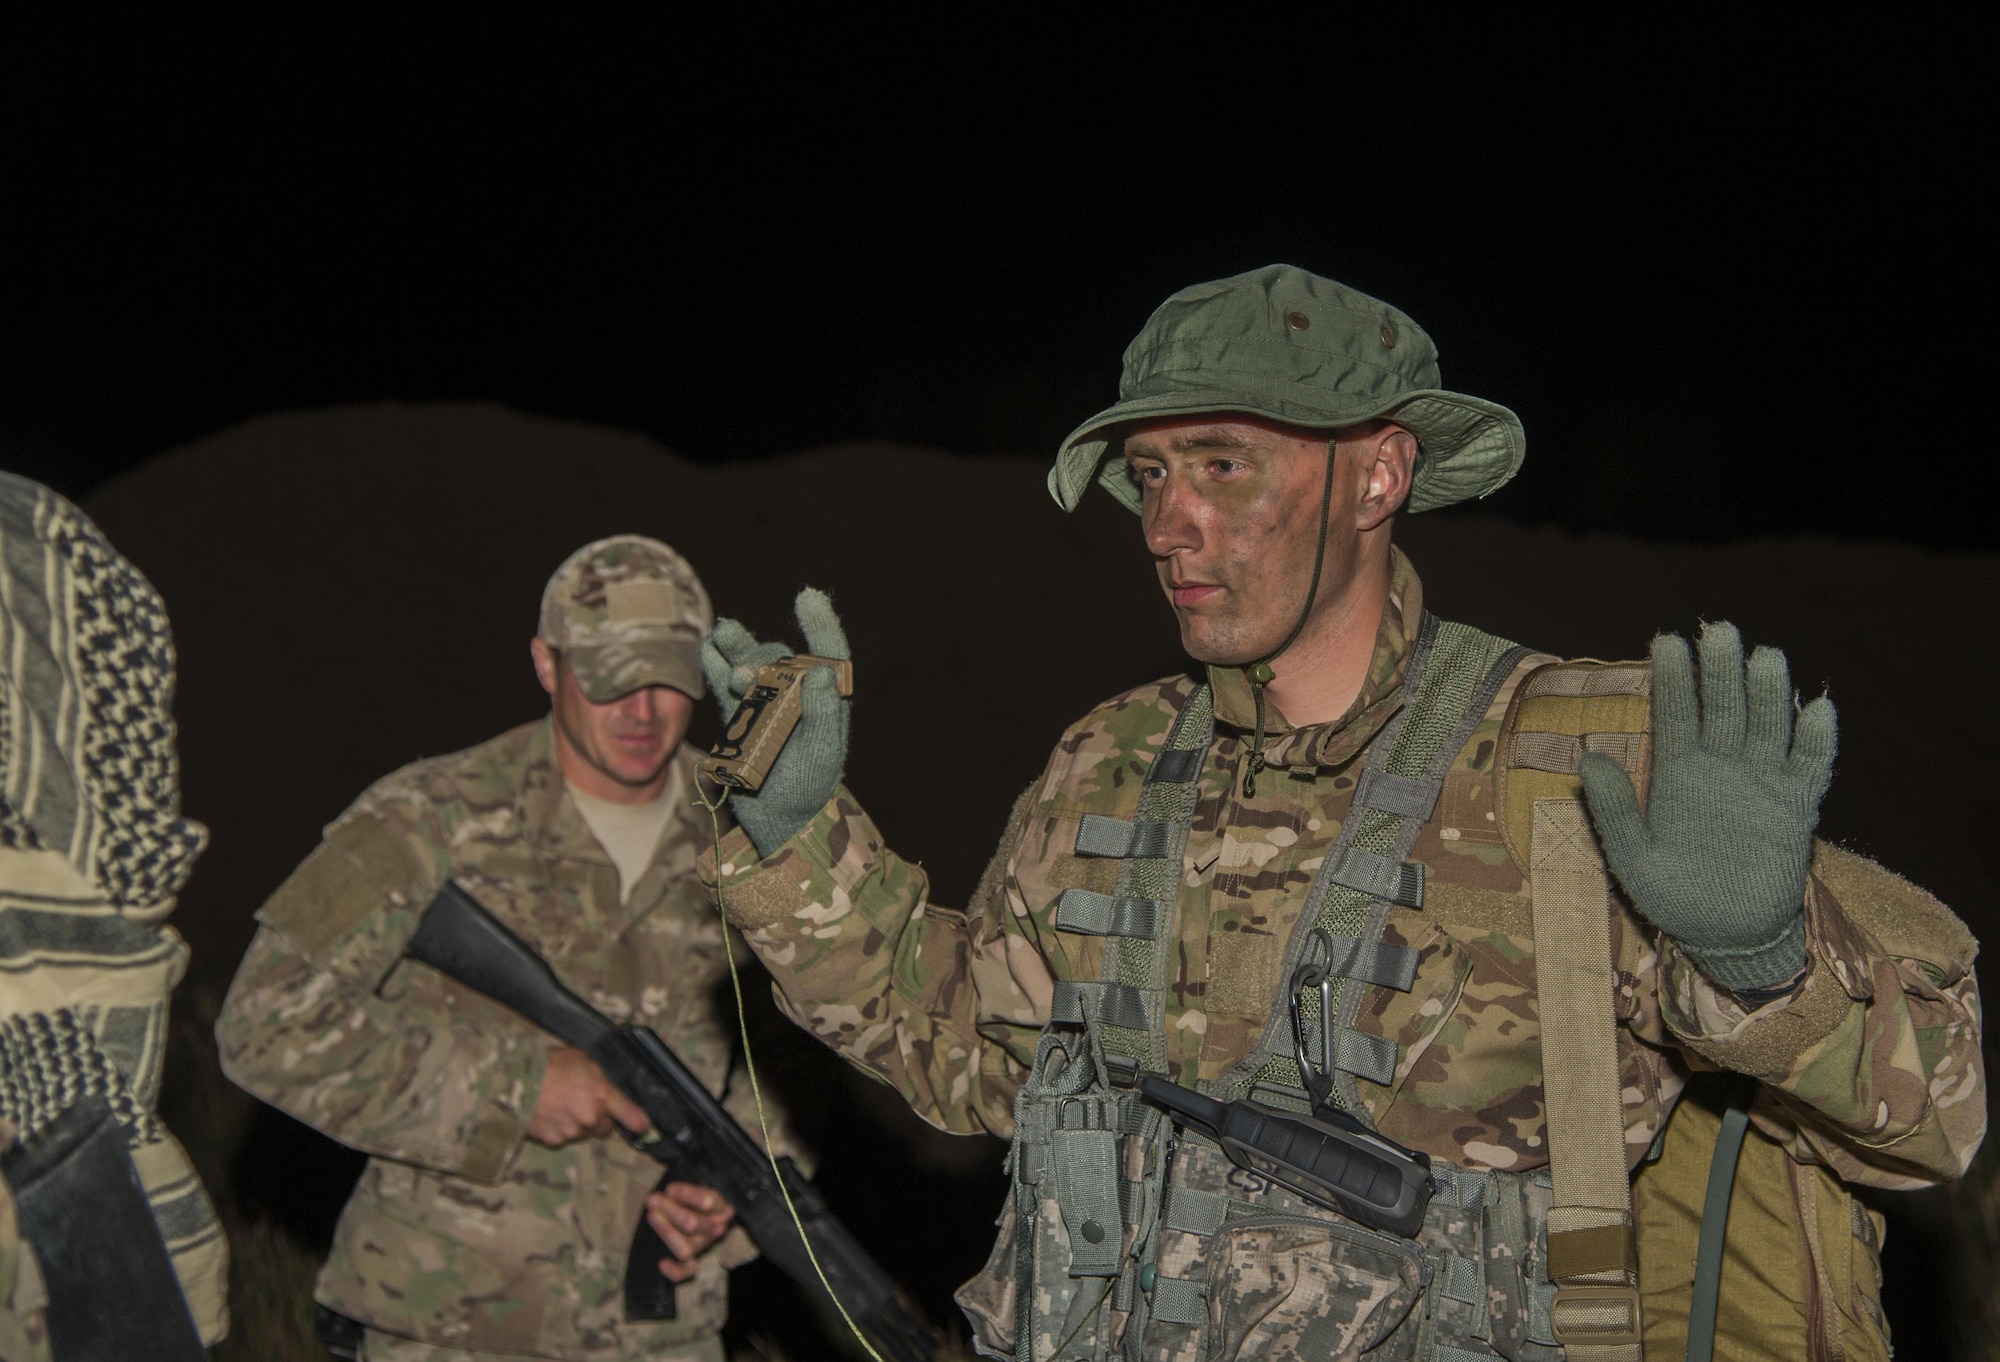 A Minot Airman listens to instructions during an evasion exercise at Garrison, N.D., Aug. 11, 2016. Different squadrons from Minot Air Force Base train with survive, evasion, resistance and escape specialists regularly to maintain readiness in the event of an emergency. (U.S. Air Force photo/Airman 1st Class Christian Sullivan)